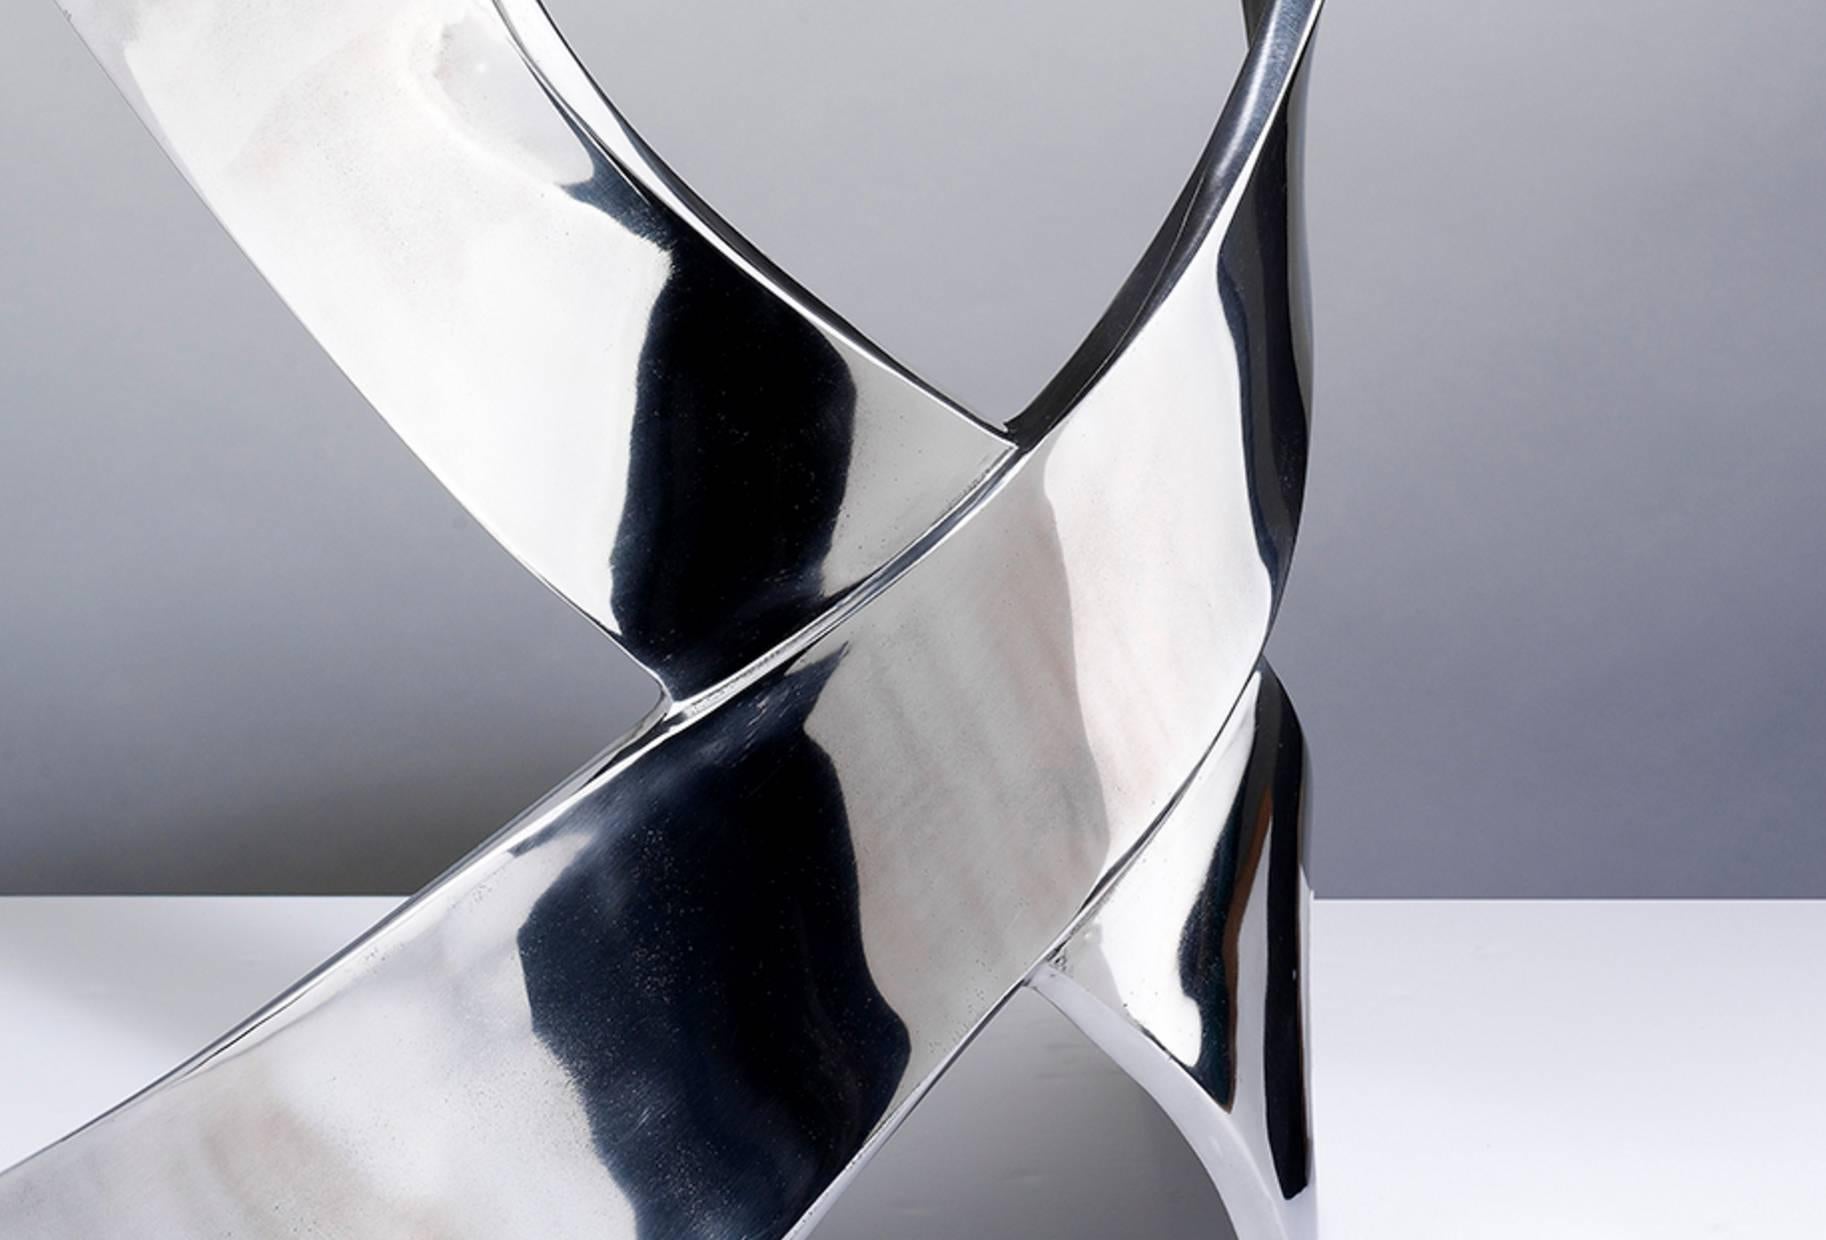 This high quality piece is made in England from sand cast and hand polished pure aluminum using local processes and sustainable craftsmanship. The result is a stunning work of art that can be used as a sculpture or as a piece of